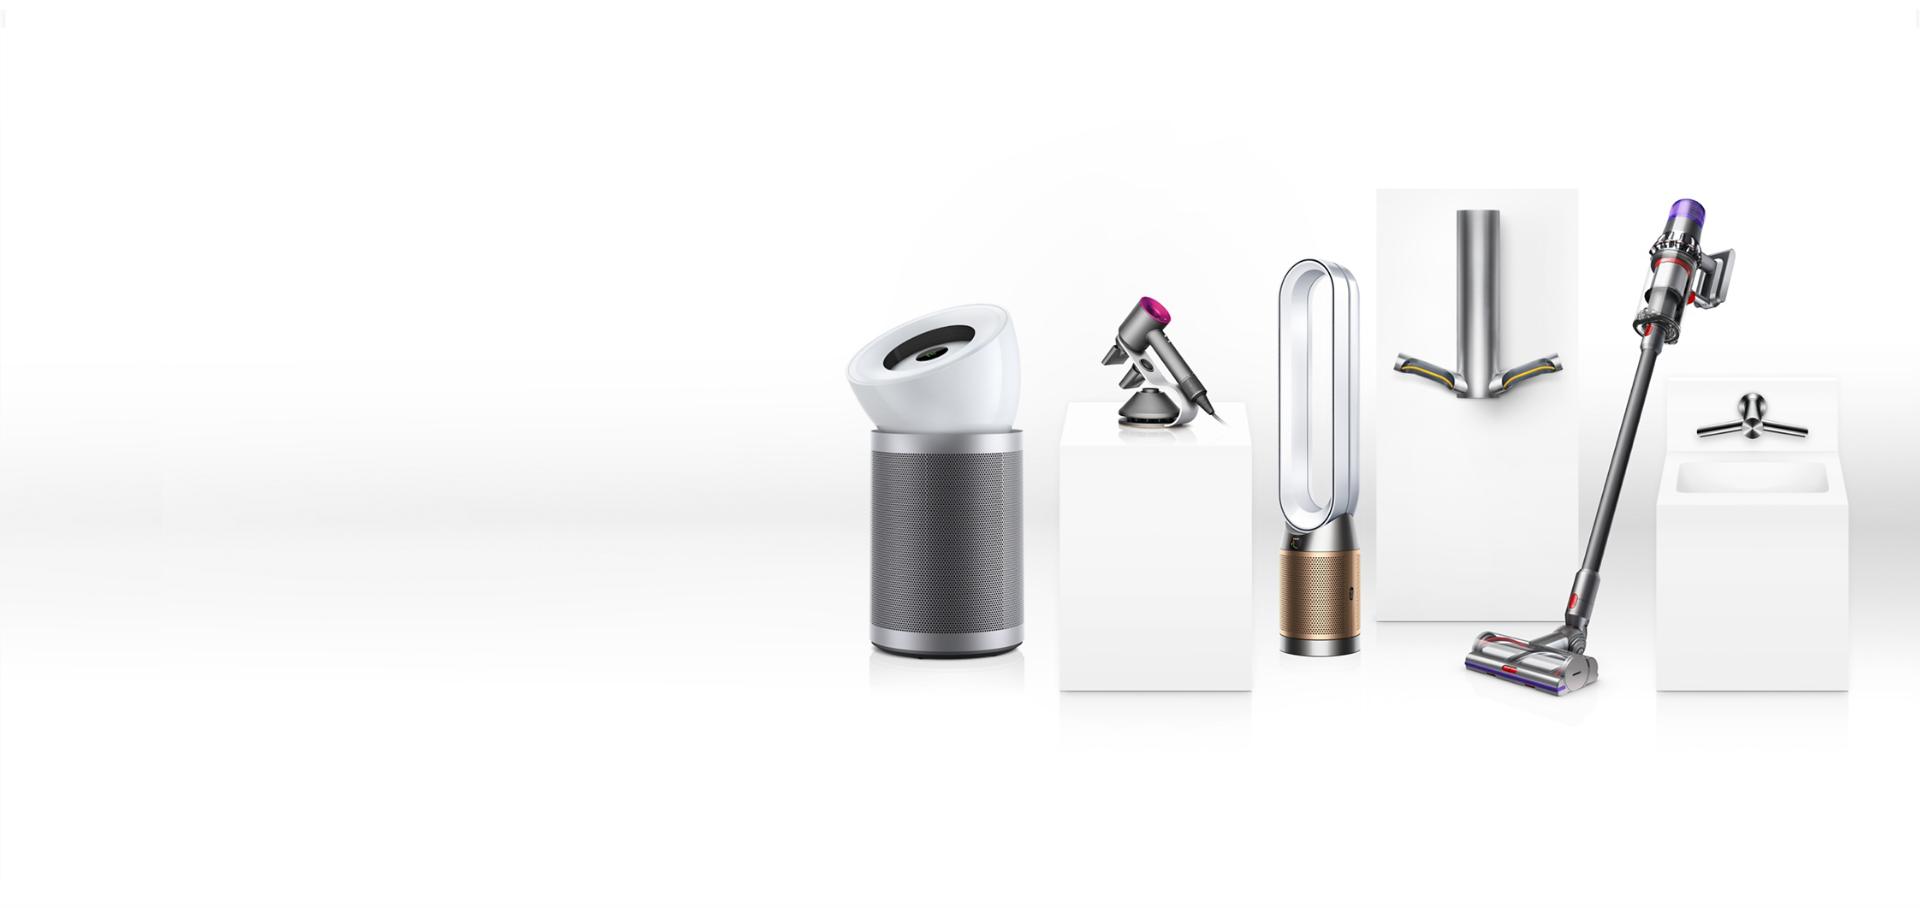 Dyson Supersonic hair dryer, Dyson Airblade 9kJ hand dryer, Dyson Pure Hot+Cool purifier fan, Dyson Wash+Dry wall in commercial setting